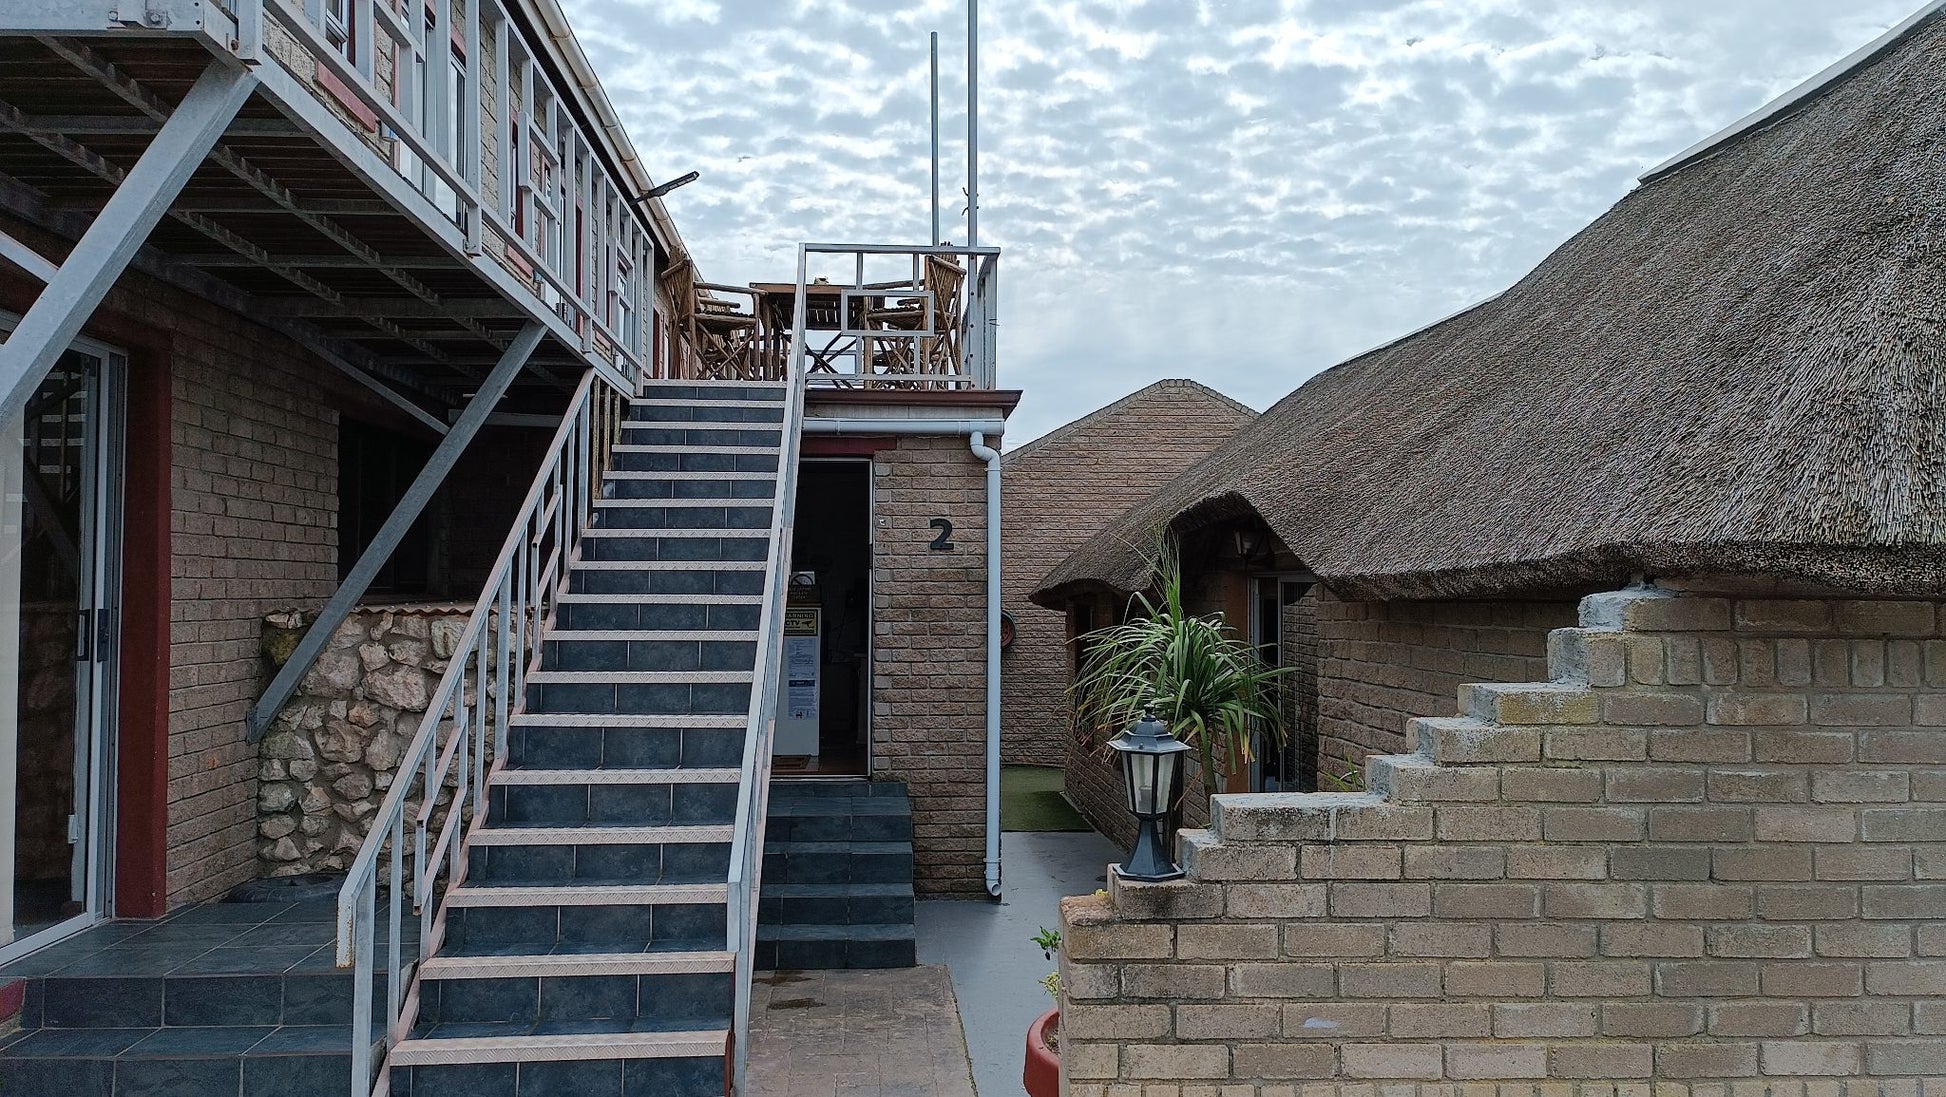 Skipskop Guest House Saldanha Western Cape South Africa House, Building, Architecture, Stairs